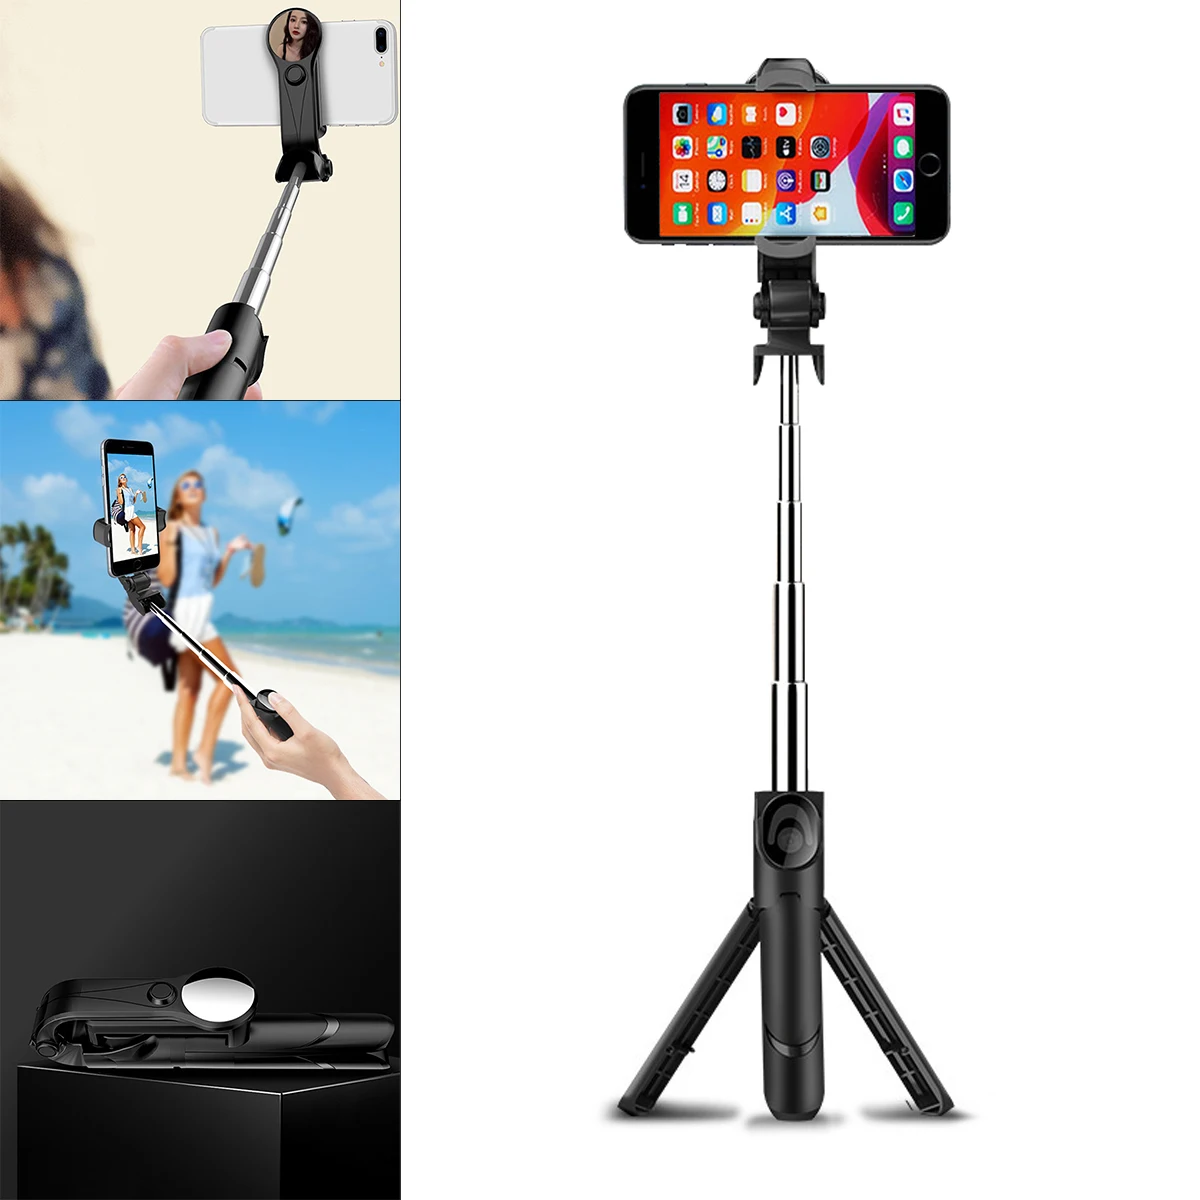 

XT09S Mobile Phone Selfie Stick Bluetooth Remote Control with Tripod Integrated Video Live Phone Holder for Smartphone Recording